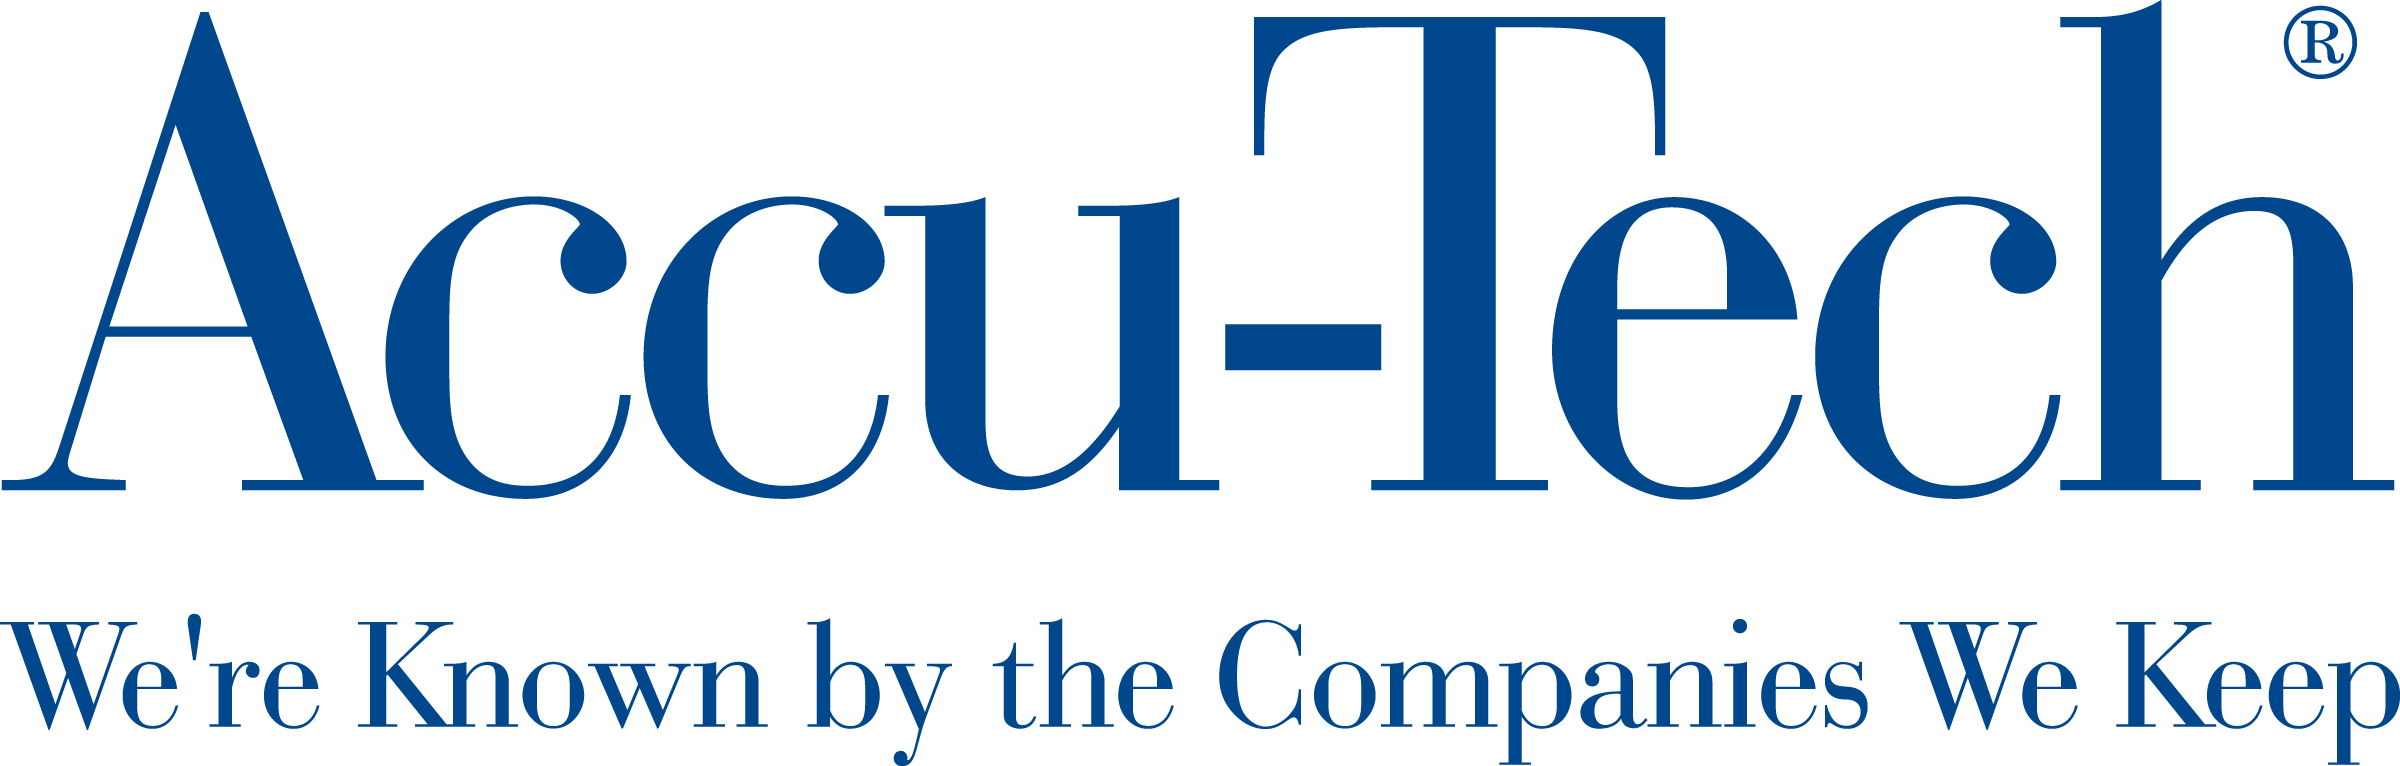 accu tech logo with tagline we're known by the companies we keep